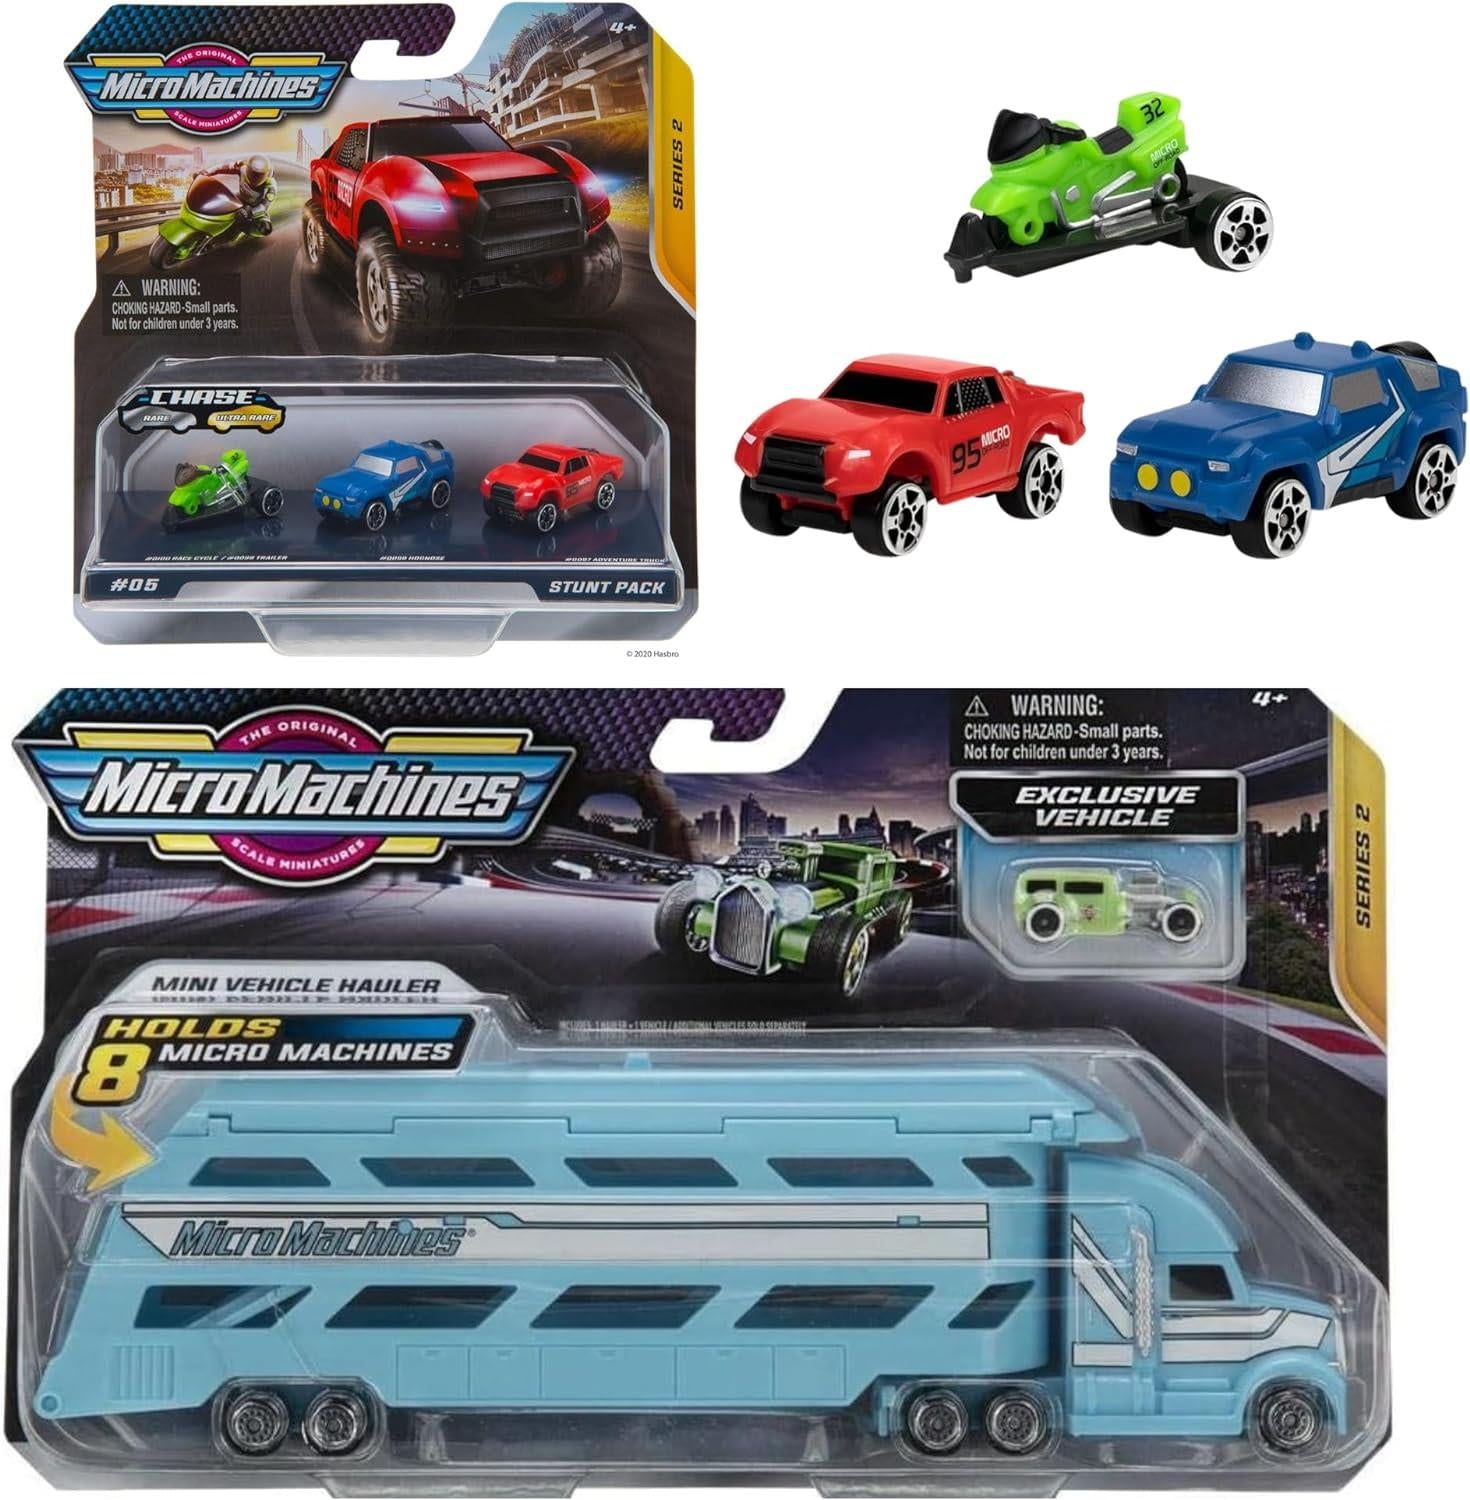 Micro Machines Toy Cars Starter Pack, Officially Licensed Chevrolet Racing  Car Speed Legends - Includes 3 Vehicles - Possibility of Something Rare 